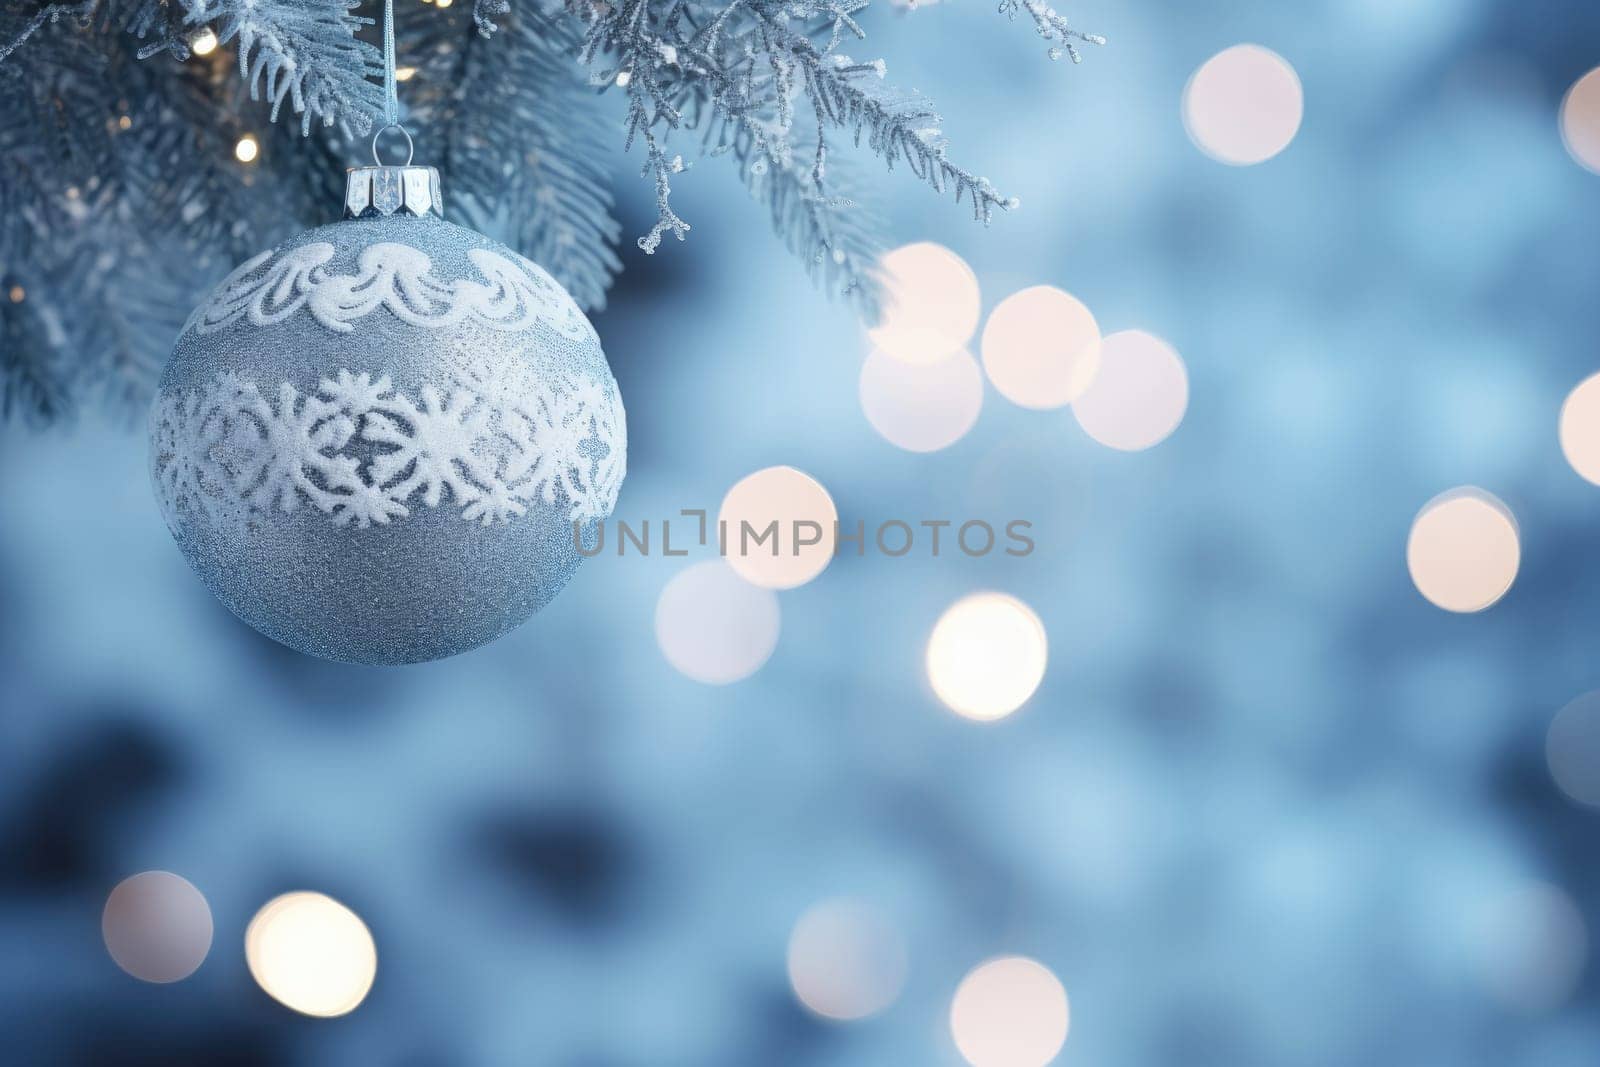 Christmas and New Years Eve background. Holiday background with Christmas baubles on fir tree with highlights and soft bokeh background. Template with text area for designing posters, web banners etc